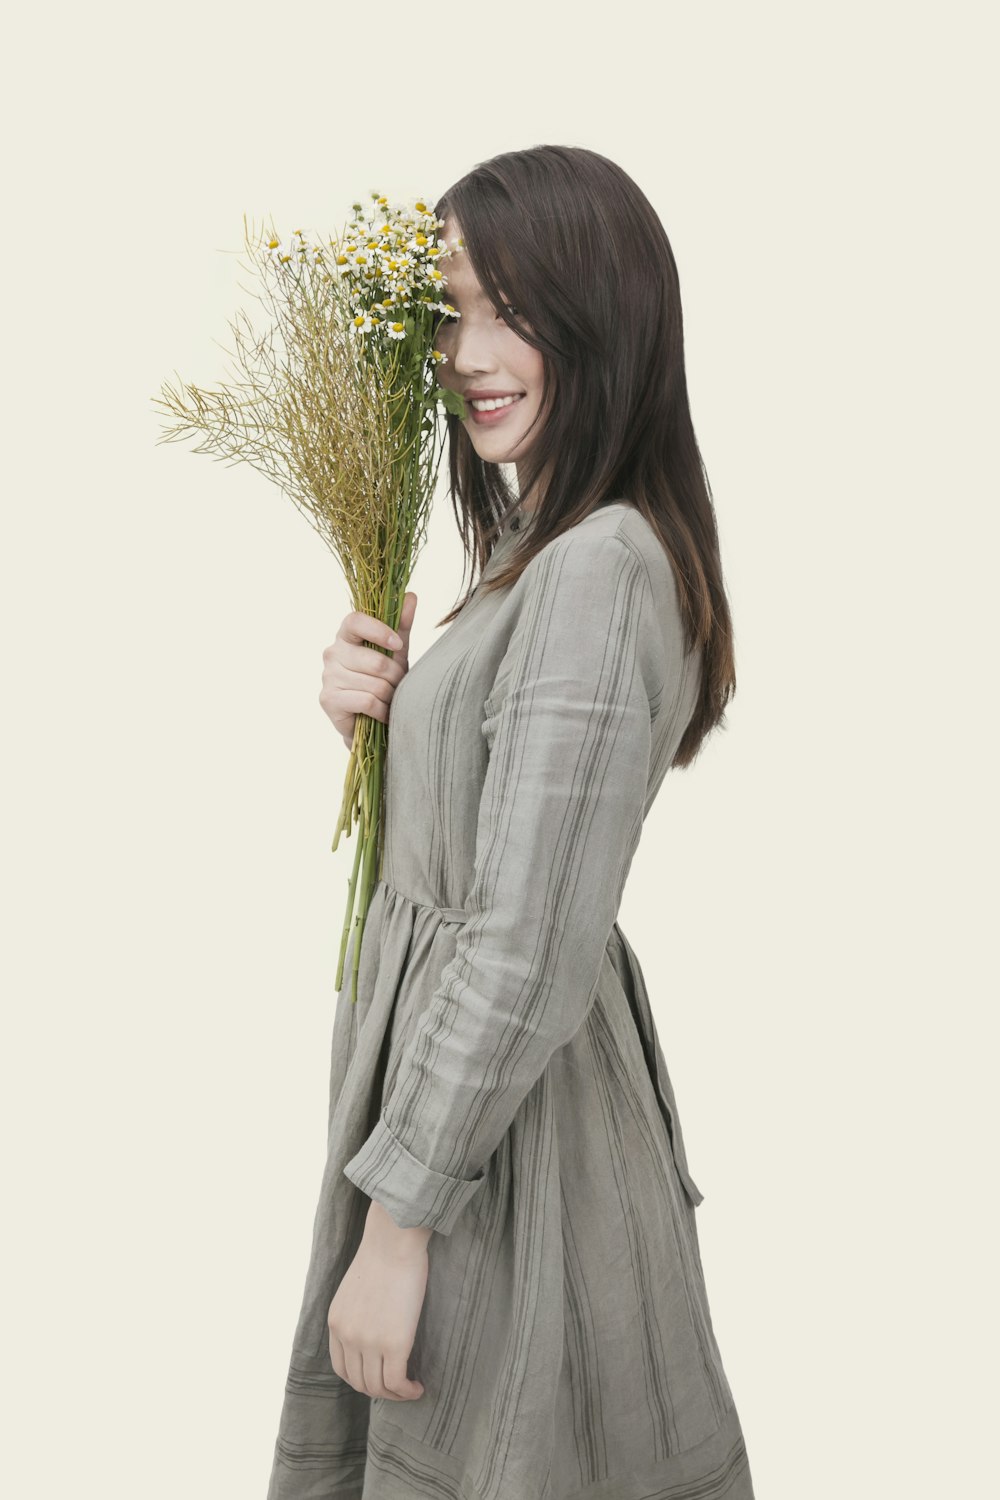 woman wearing gray and black striped long-sleeved dress holding white petaled flowers